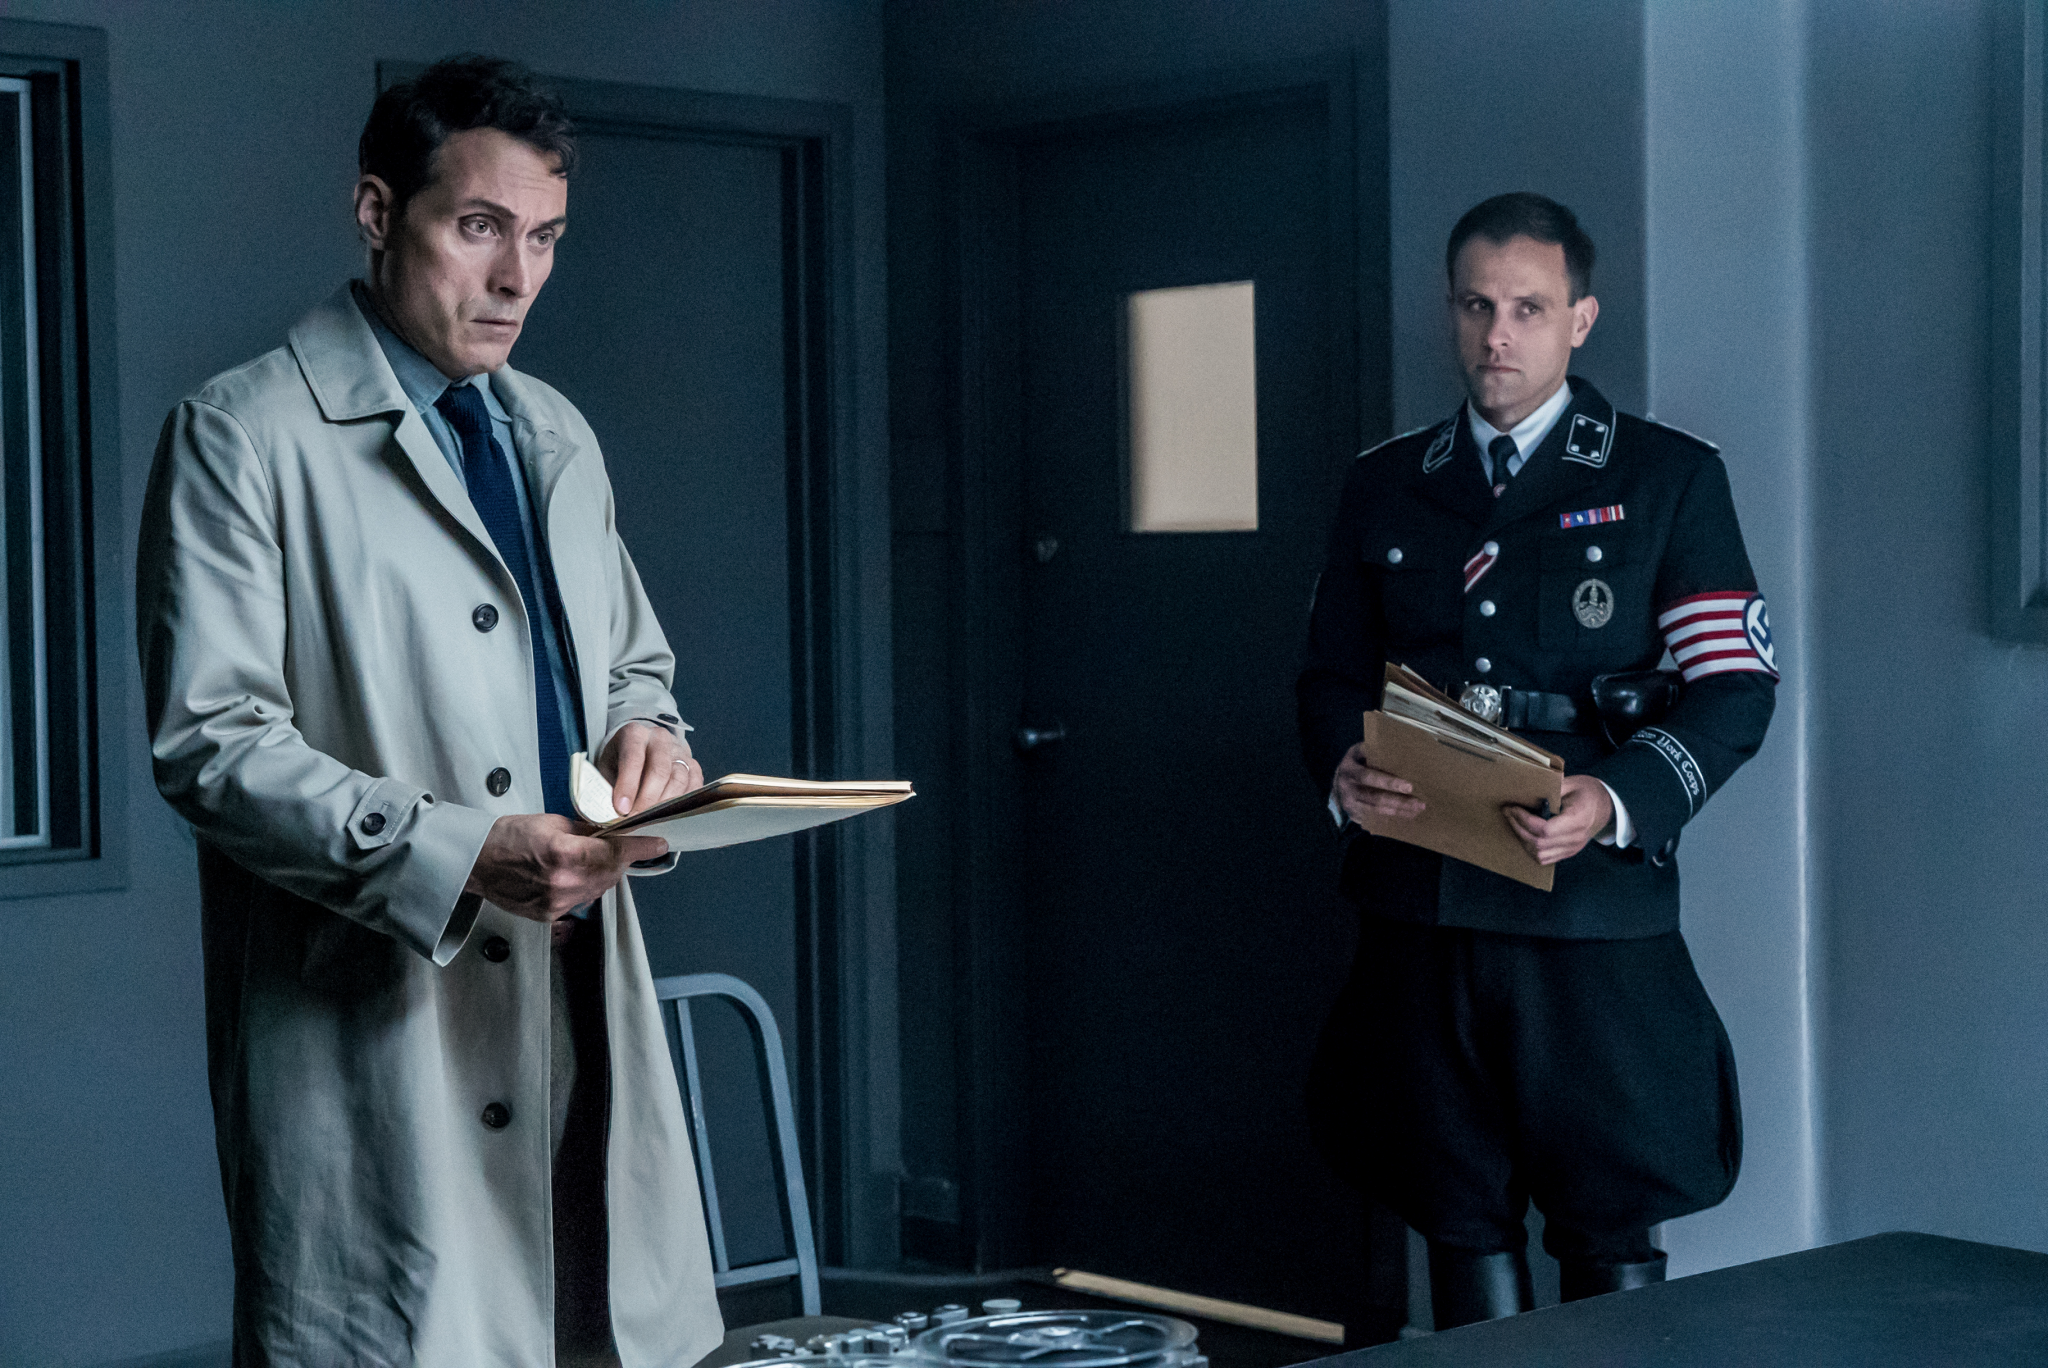 Publicity still of Rufus Sewell in The Man in the High Castle: Season 2. Photo Credit: Liane Hentscher/Amazon